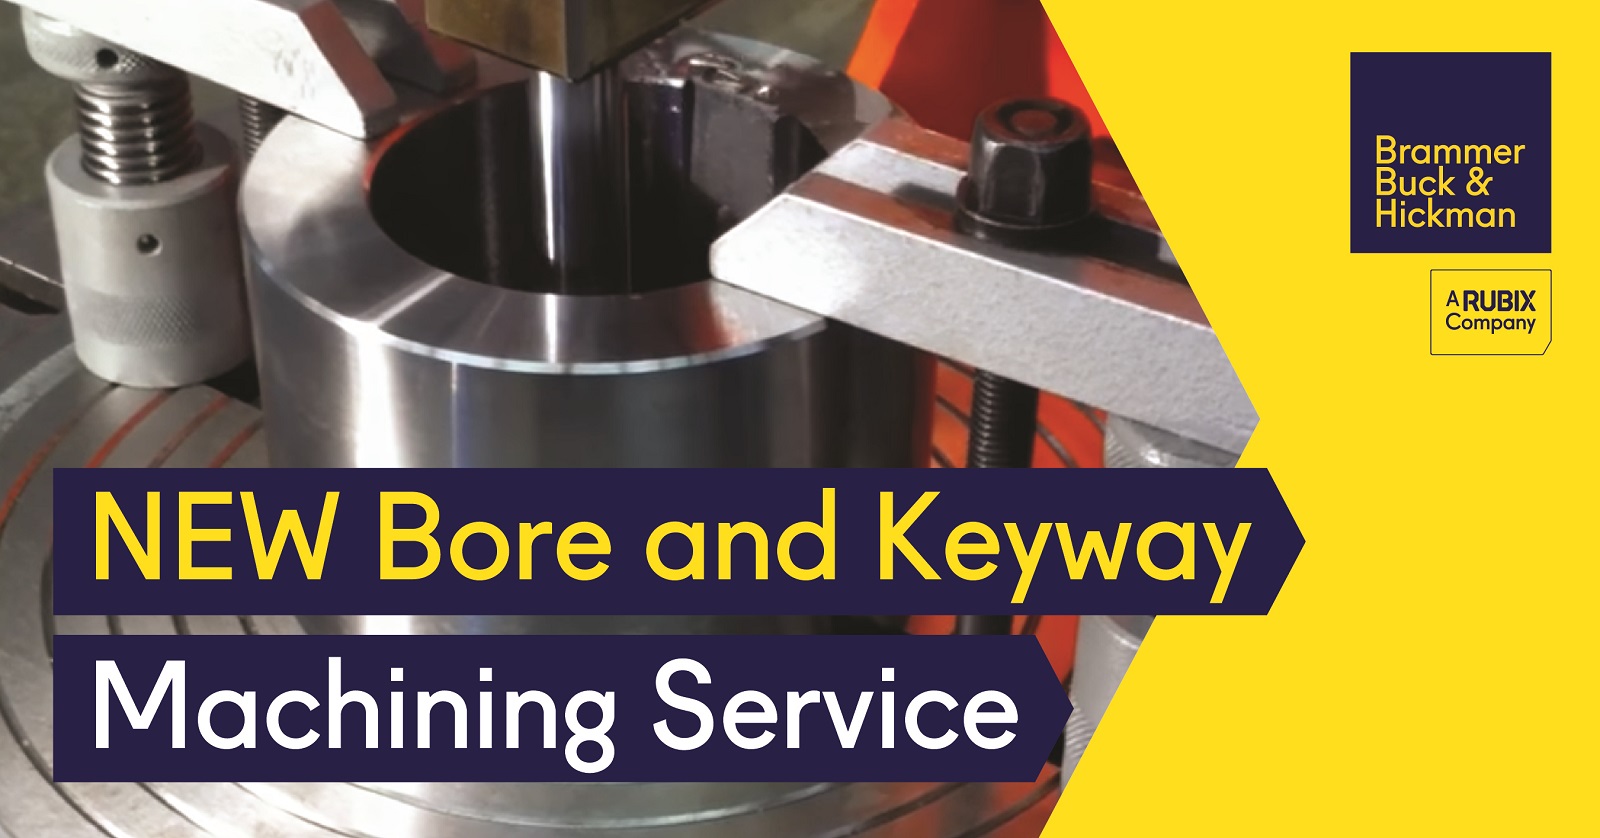 New bore and keyway machining service